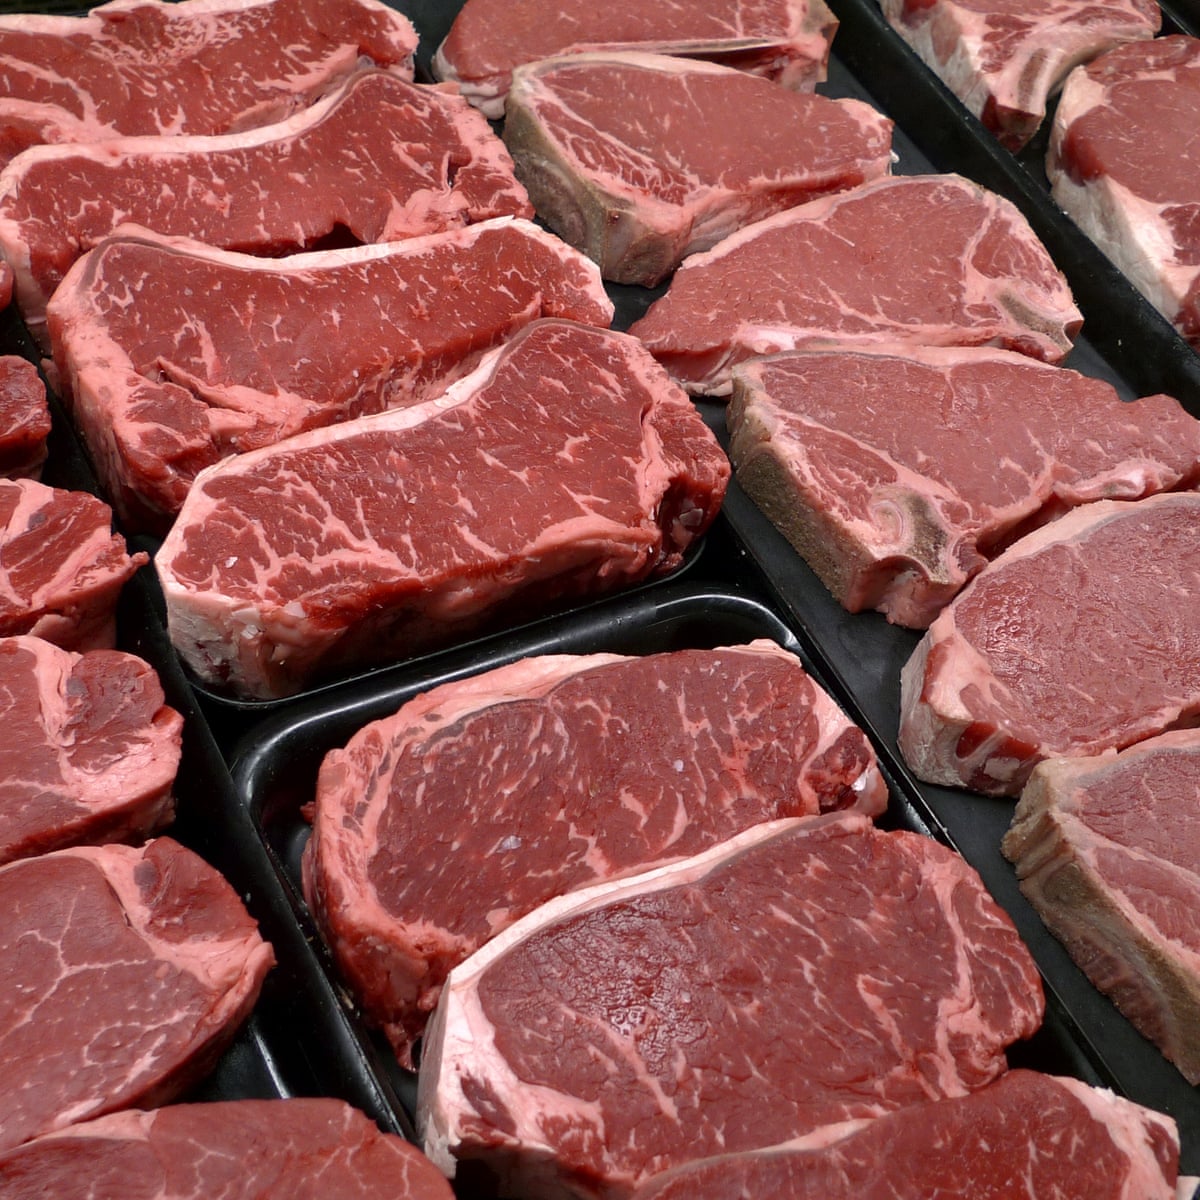 Rising global meat consumption 'will devastate environment' | Food | The Guardian